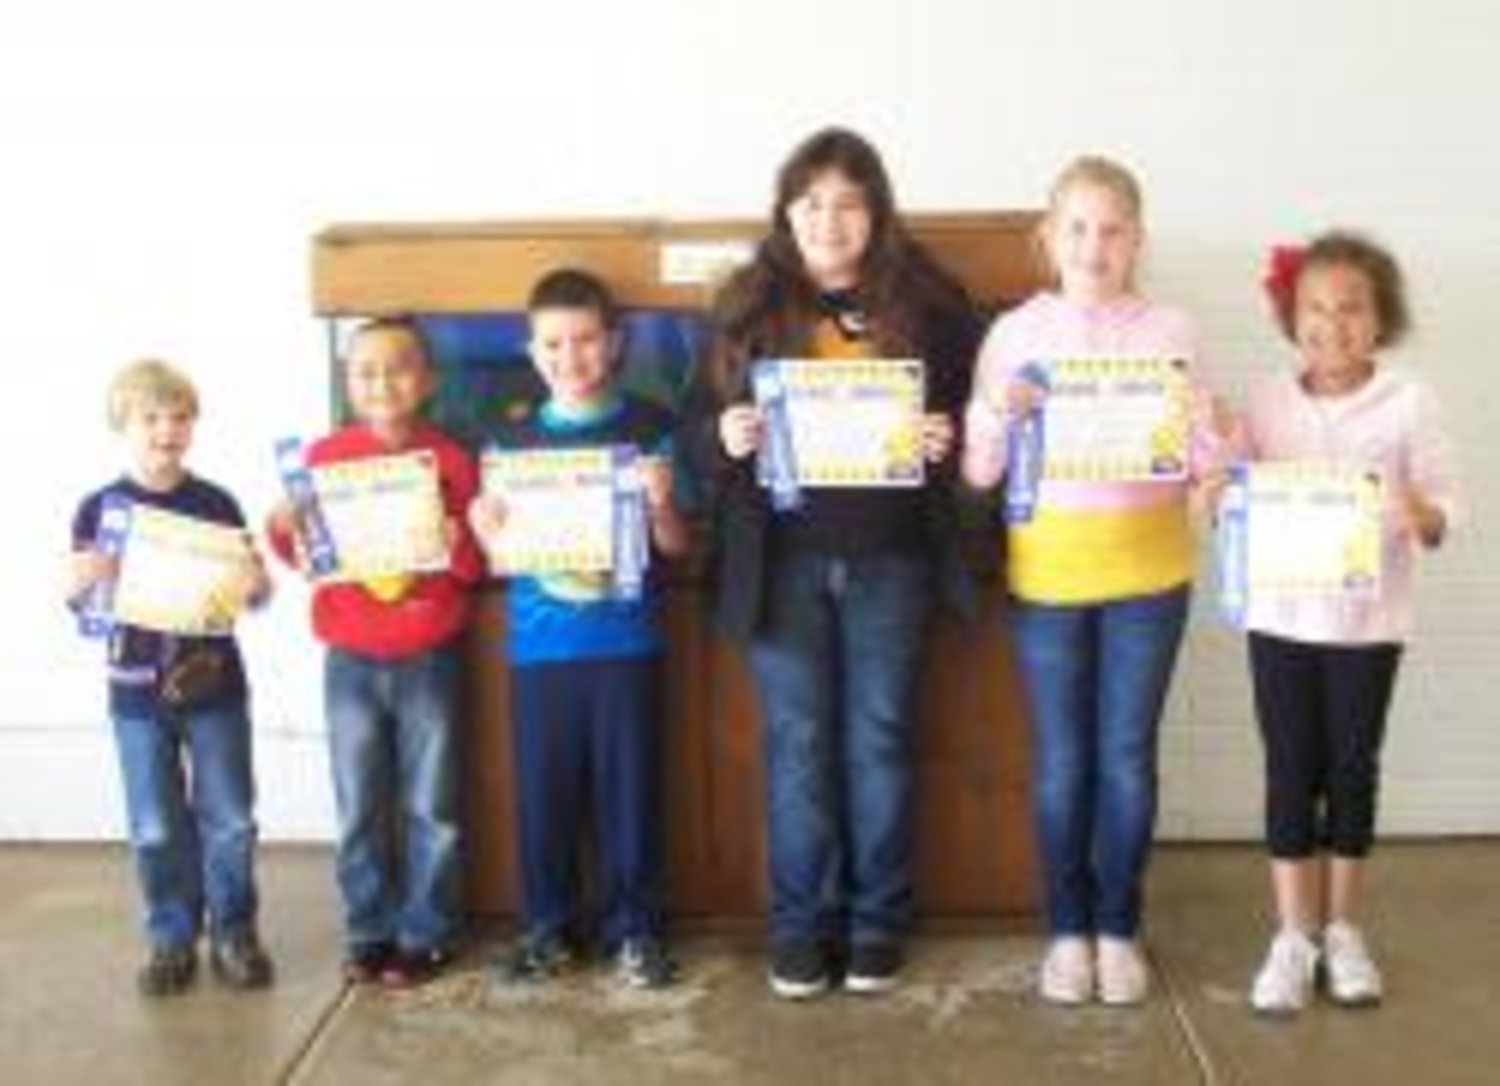 April students of the month are: William Wright (Pre-K); Alex Vasquez (Kindergarten); Clifton Gamblin (1st grade); Hailey Bissell (4th grade); Avery Humphrey (5th grade) and Cheyanne George (2nd grade).